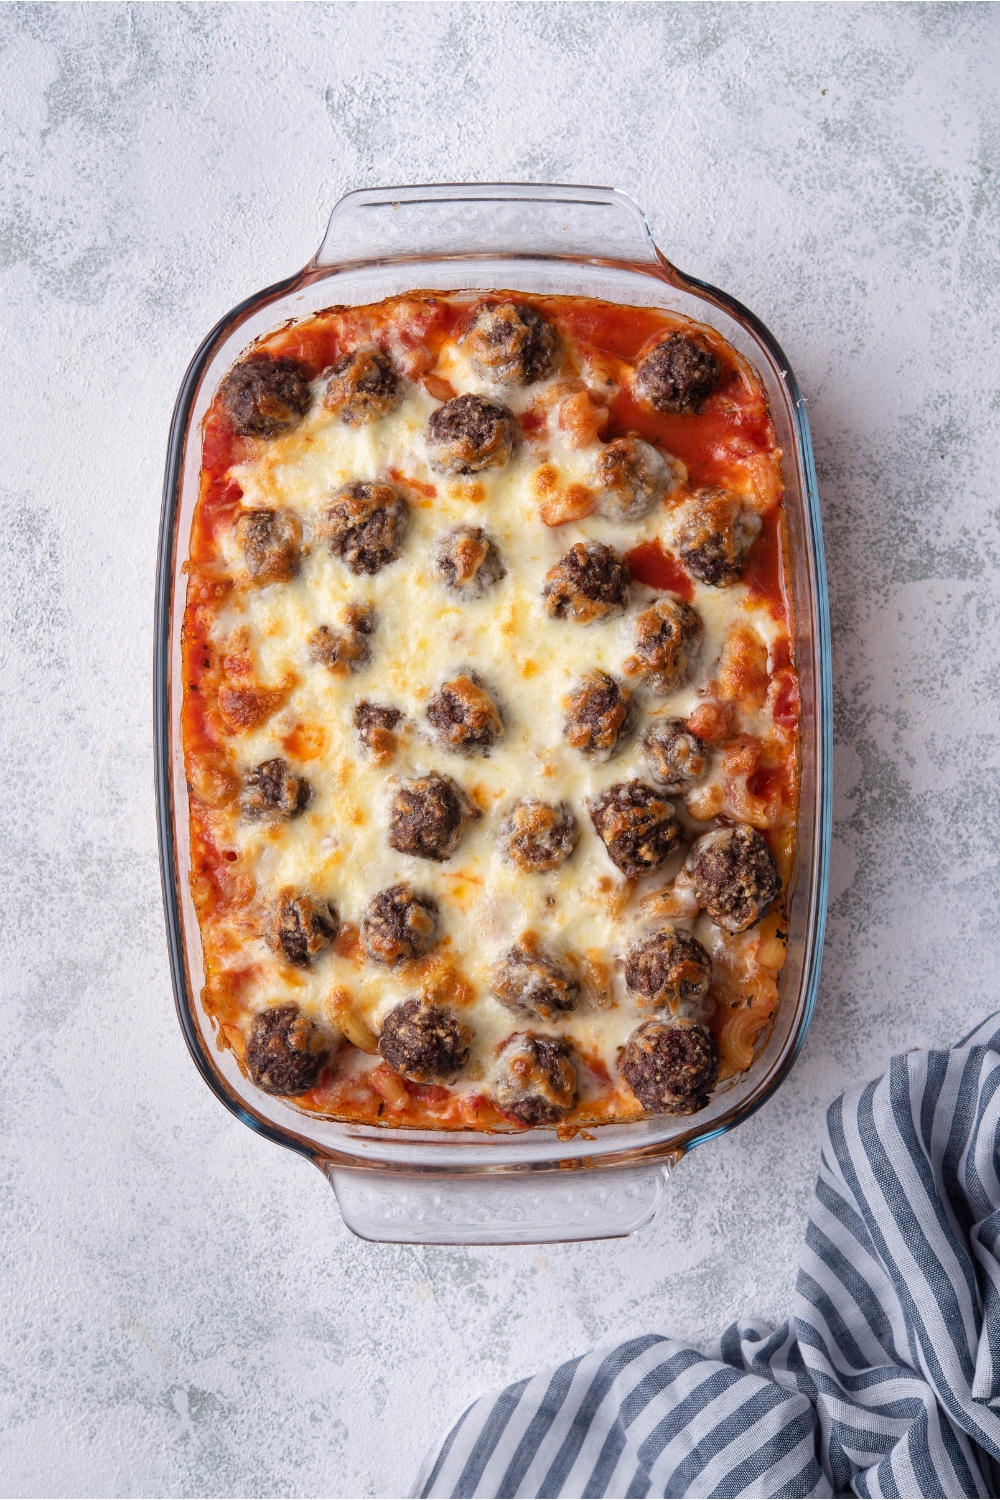 A clear baking dish with pasta, red sauce, meatballs, and melted cheese.